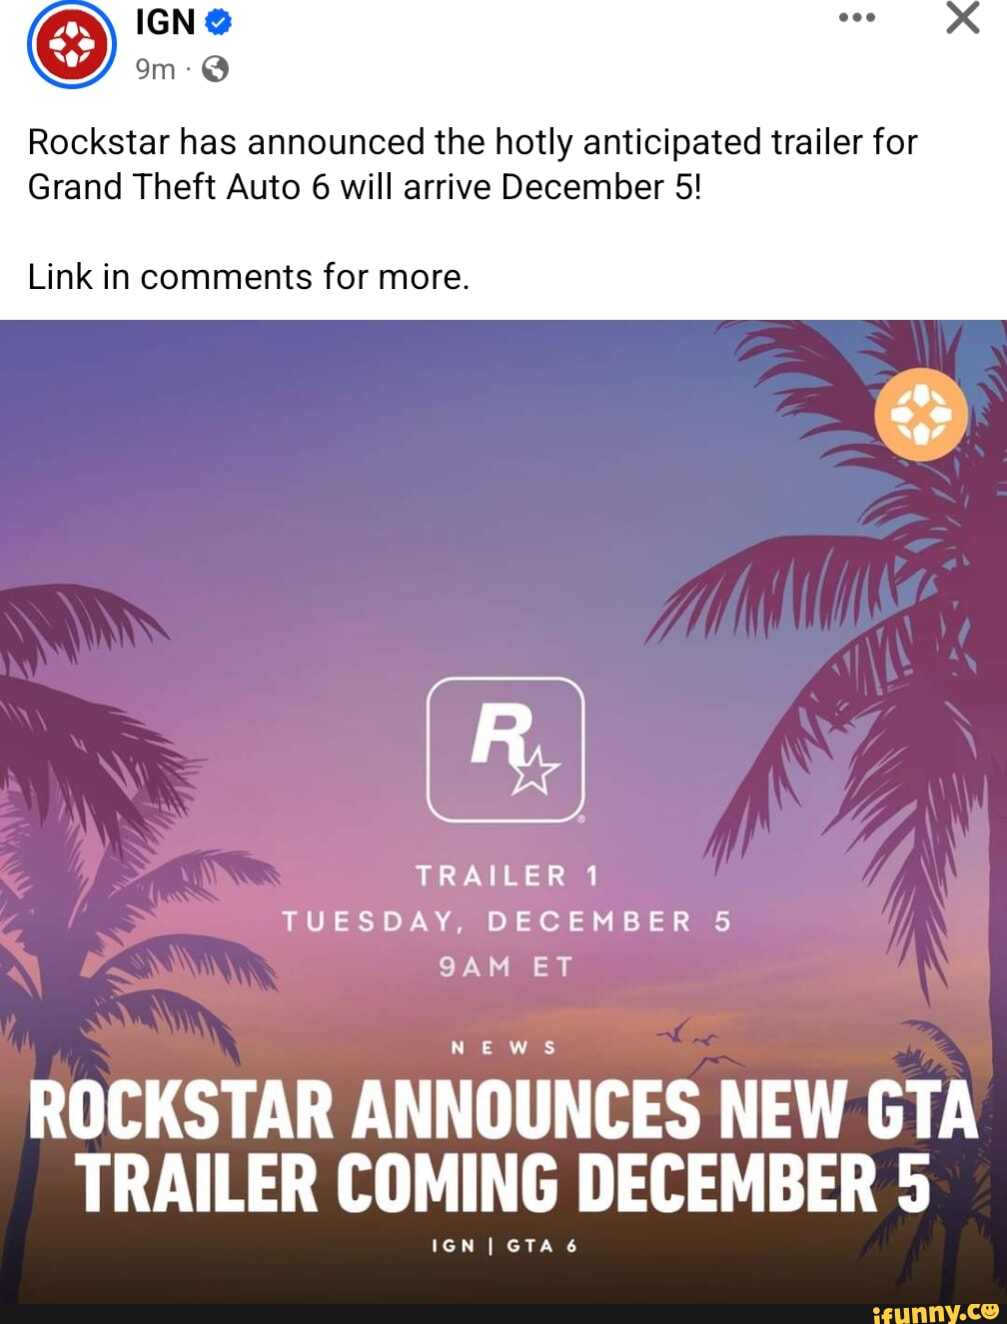 Grand Theft Auto 6 Trailer Arriving in December - IGN